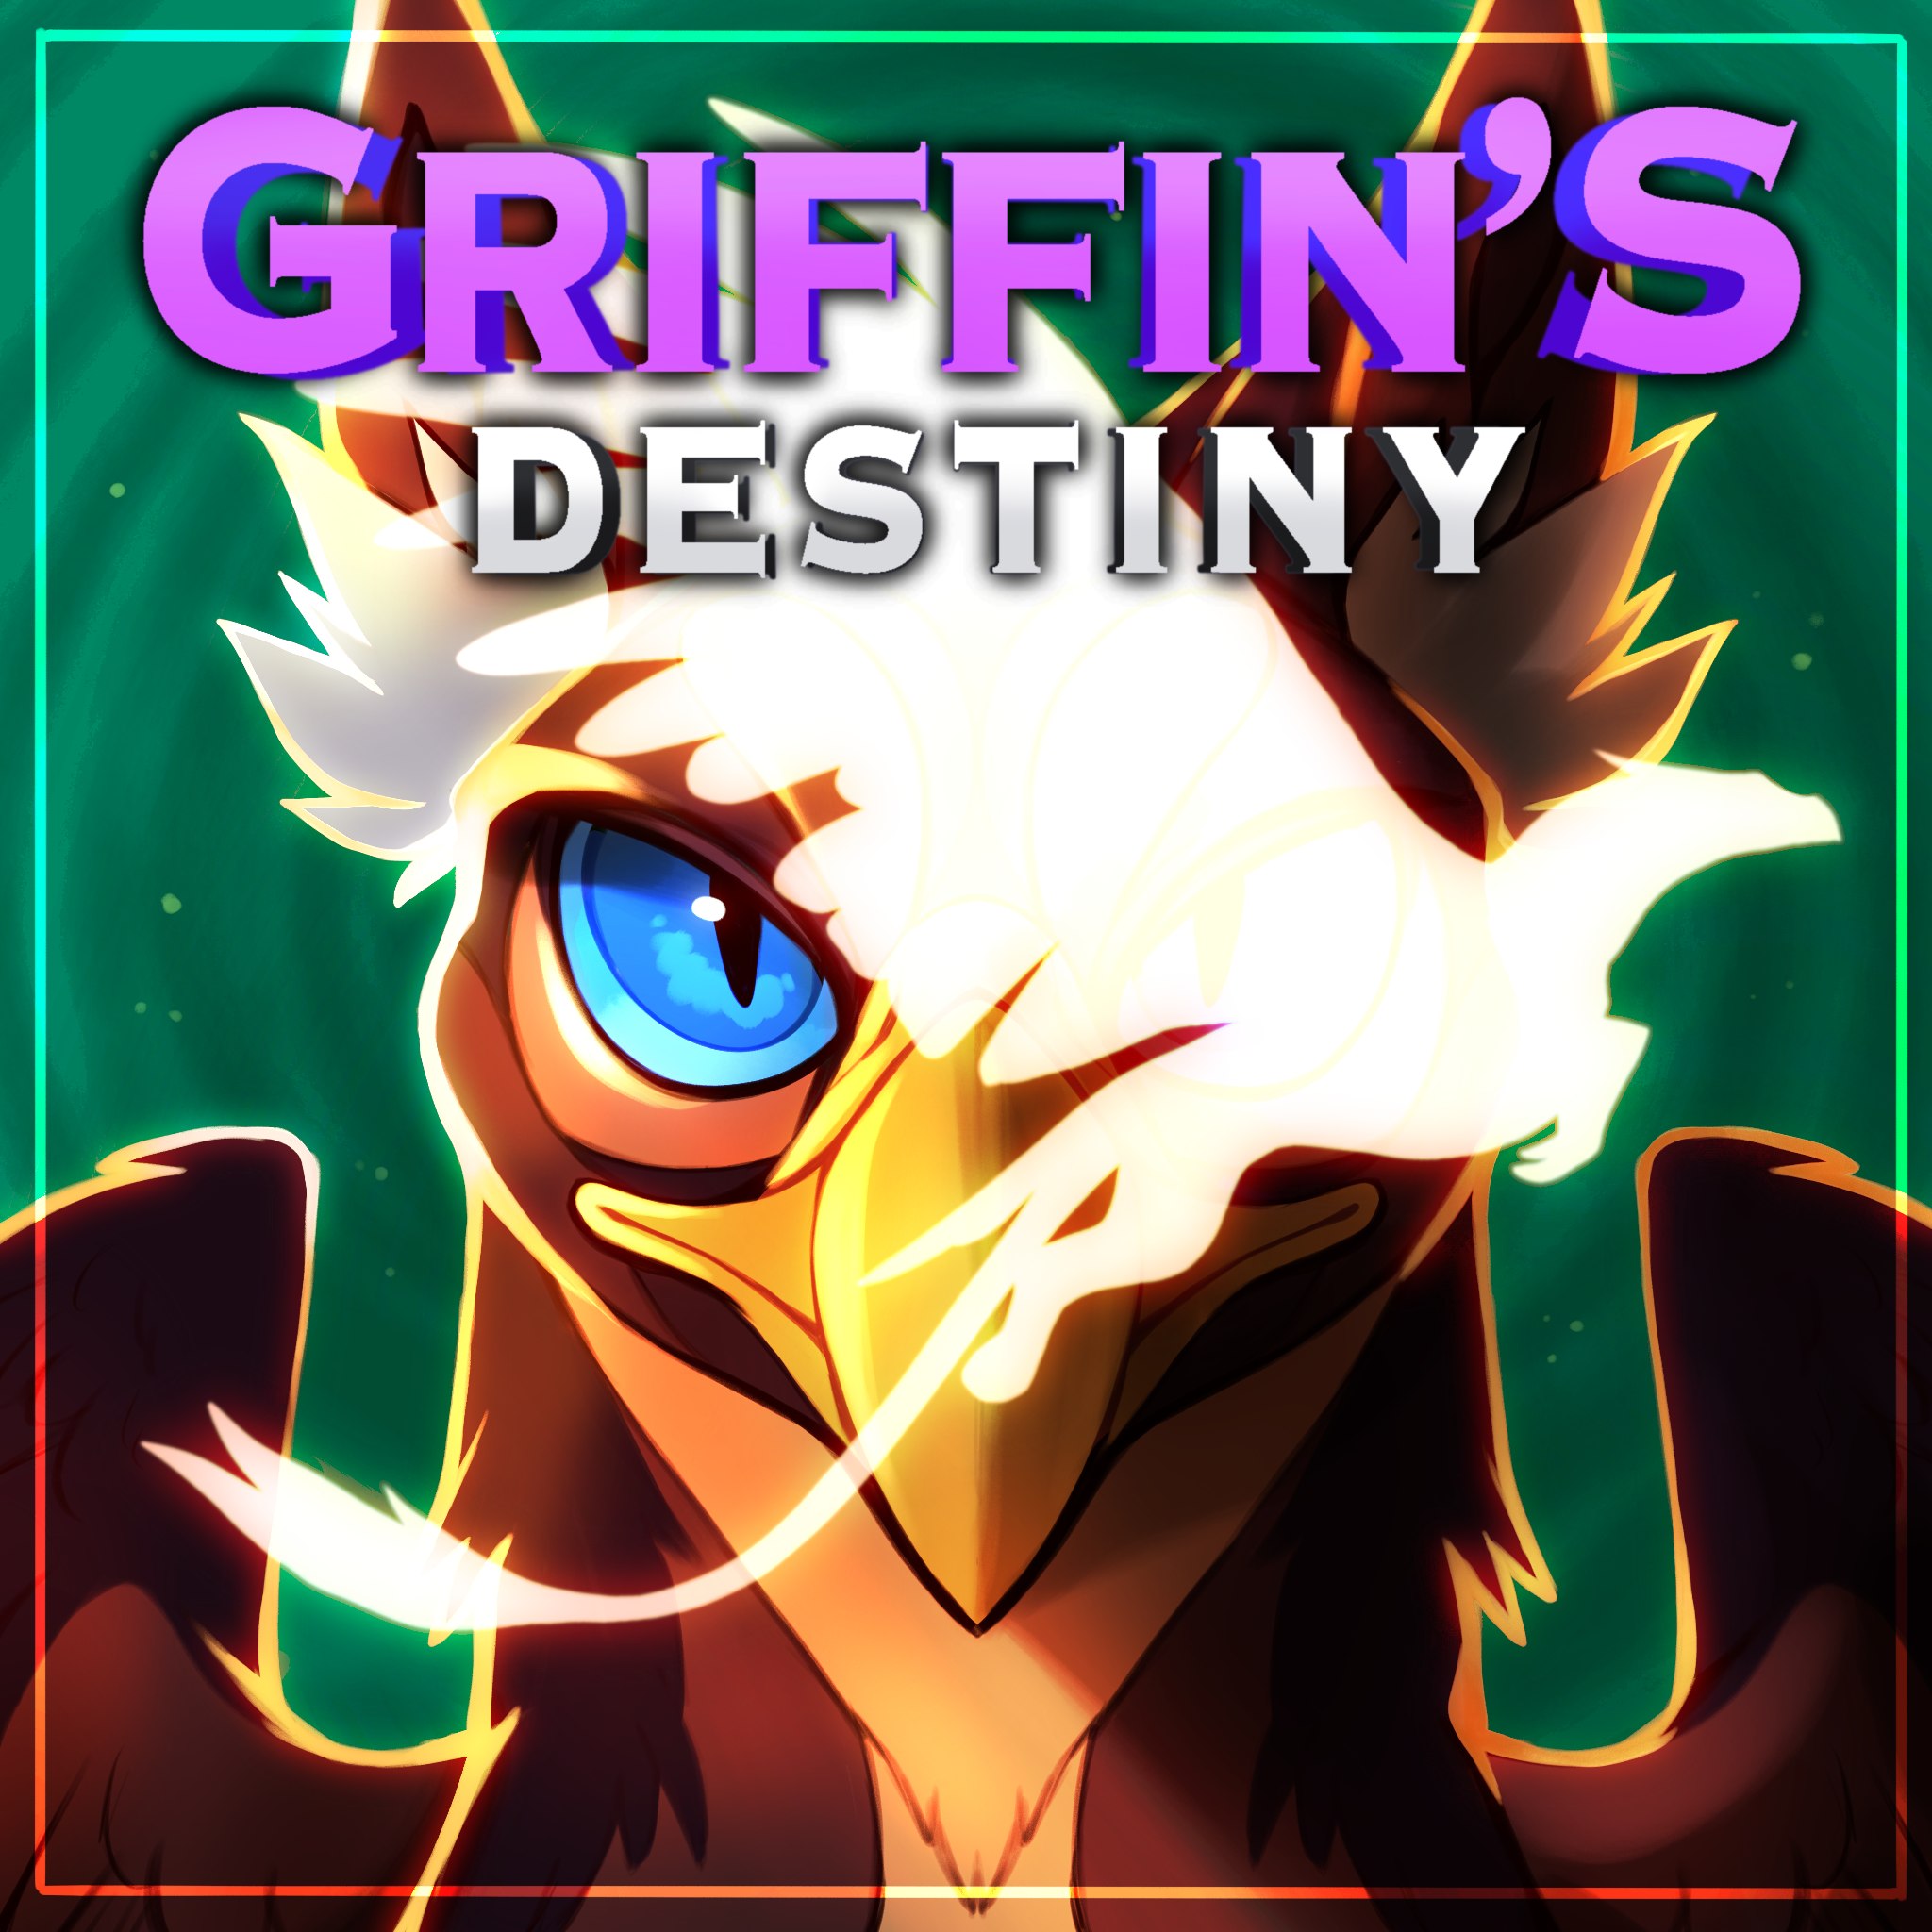 Roleplay Items, Griffin's Destiny Wiki